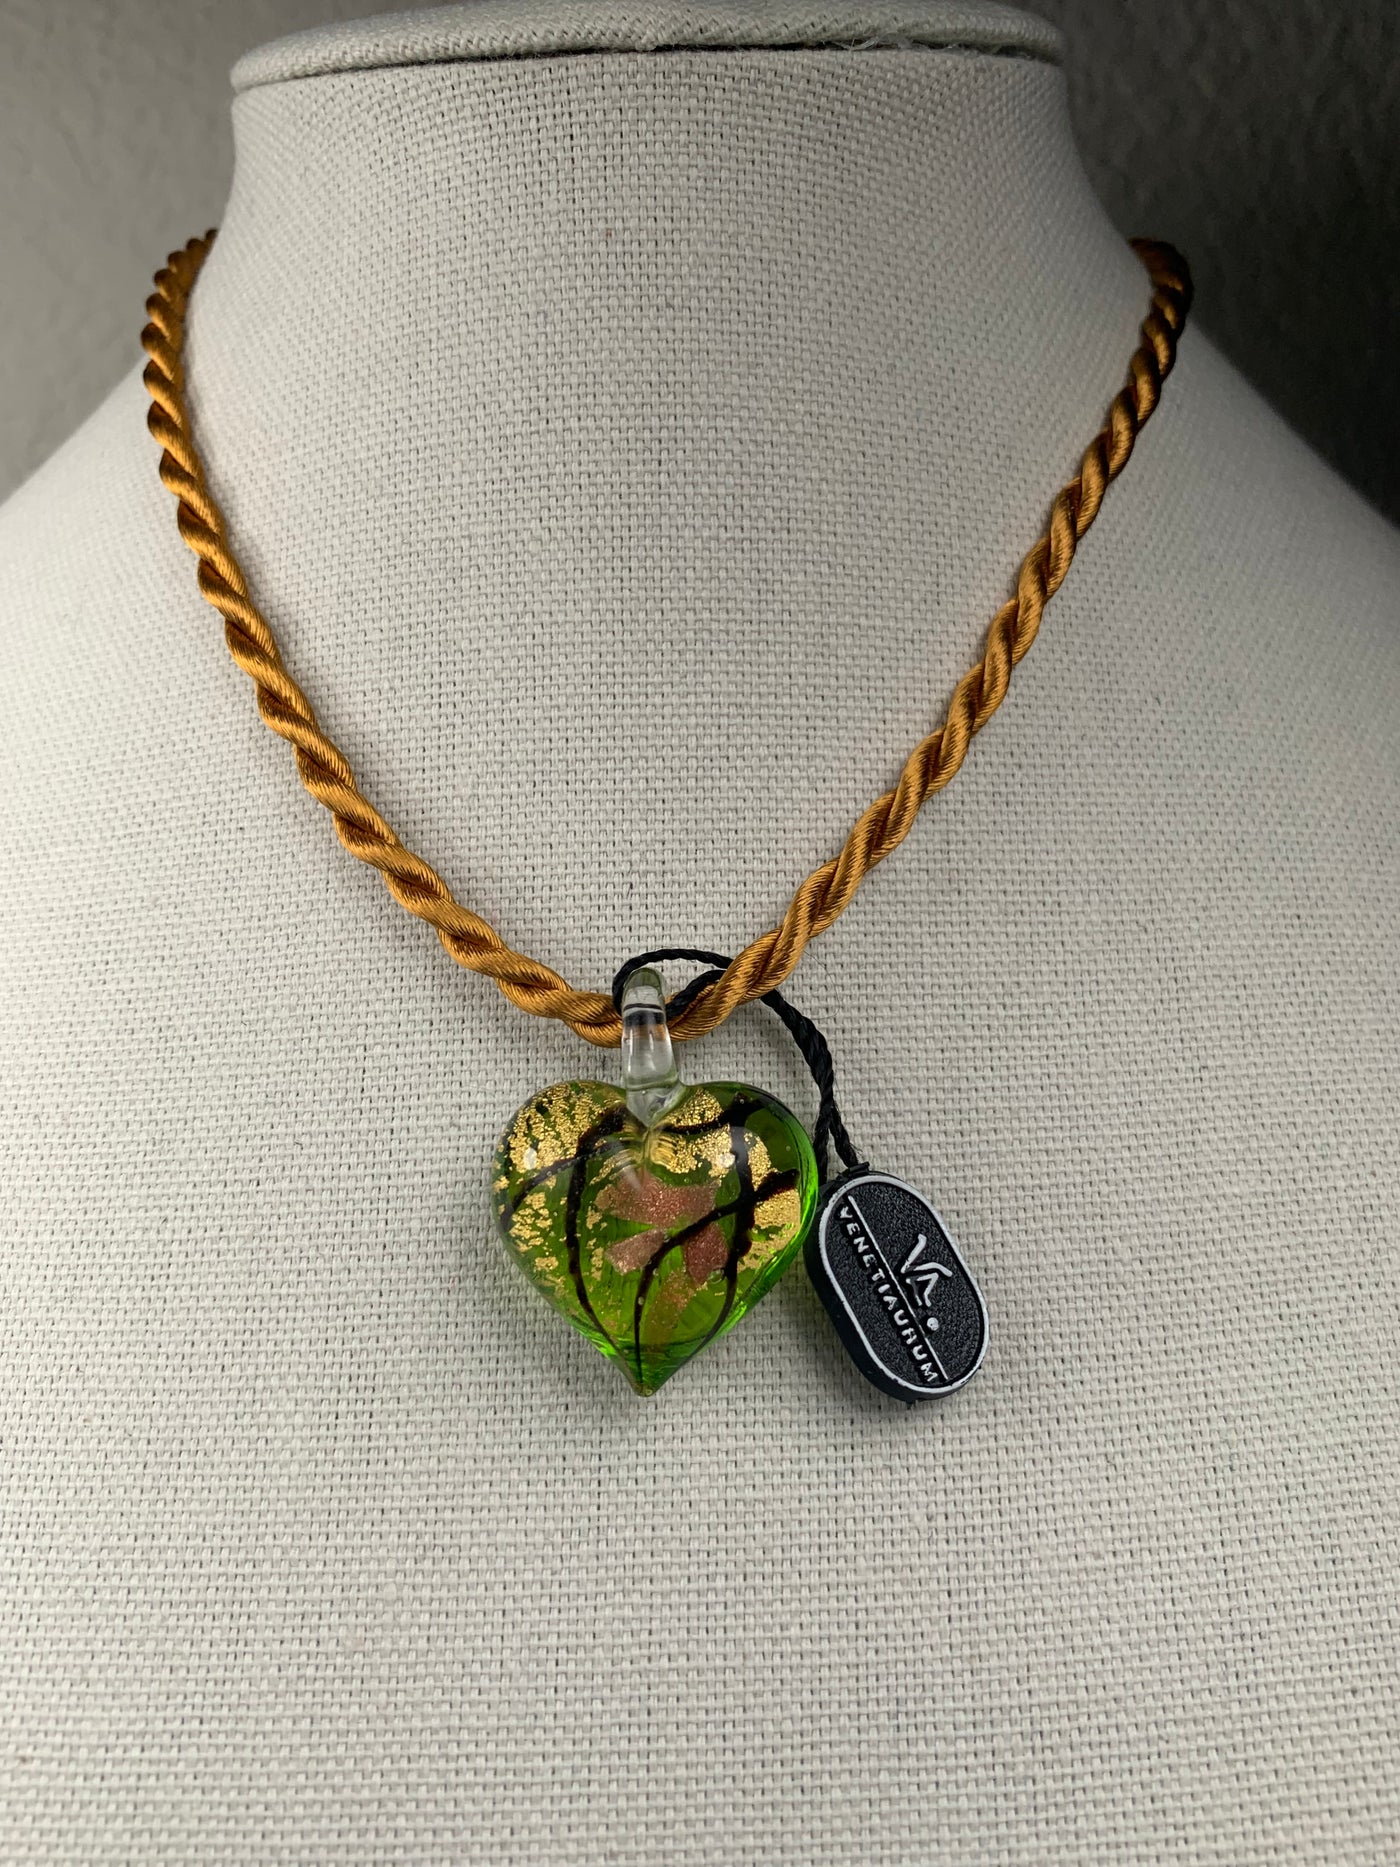 Lime Green Murano Glass Puffy Heart Pendant from Italy